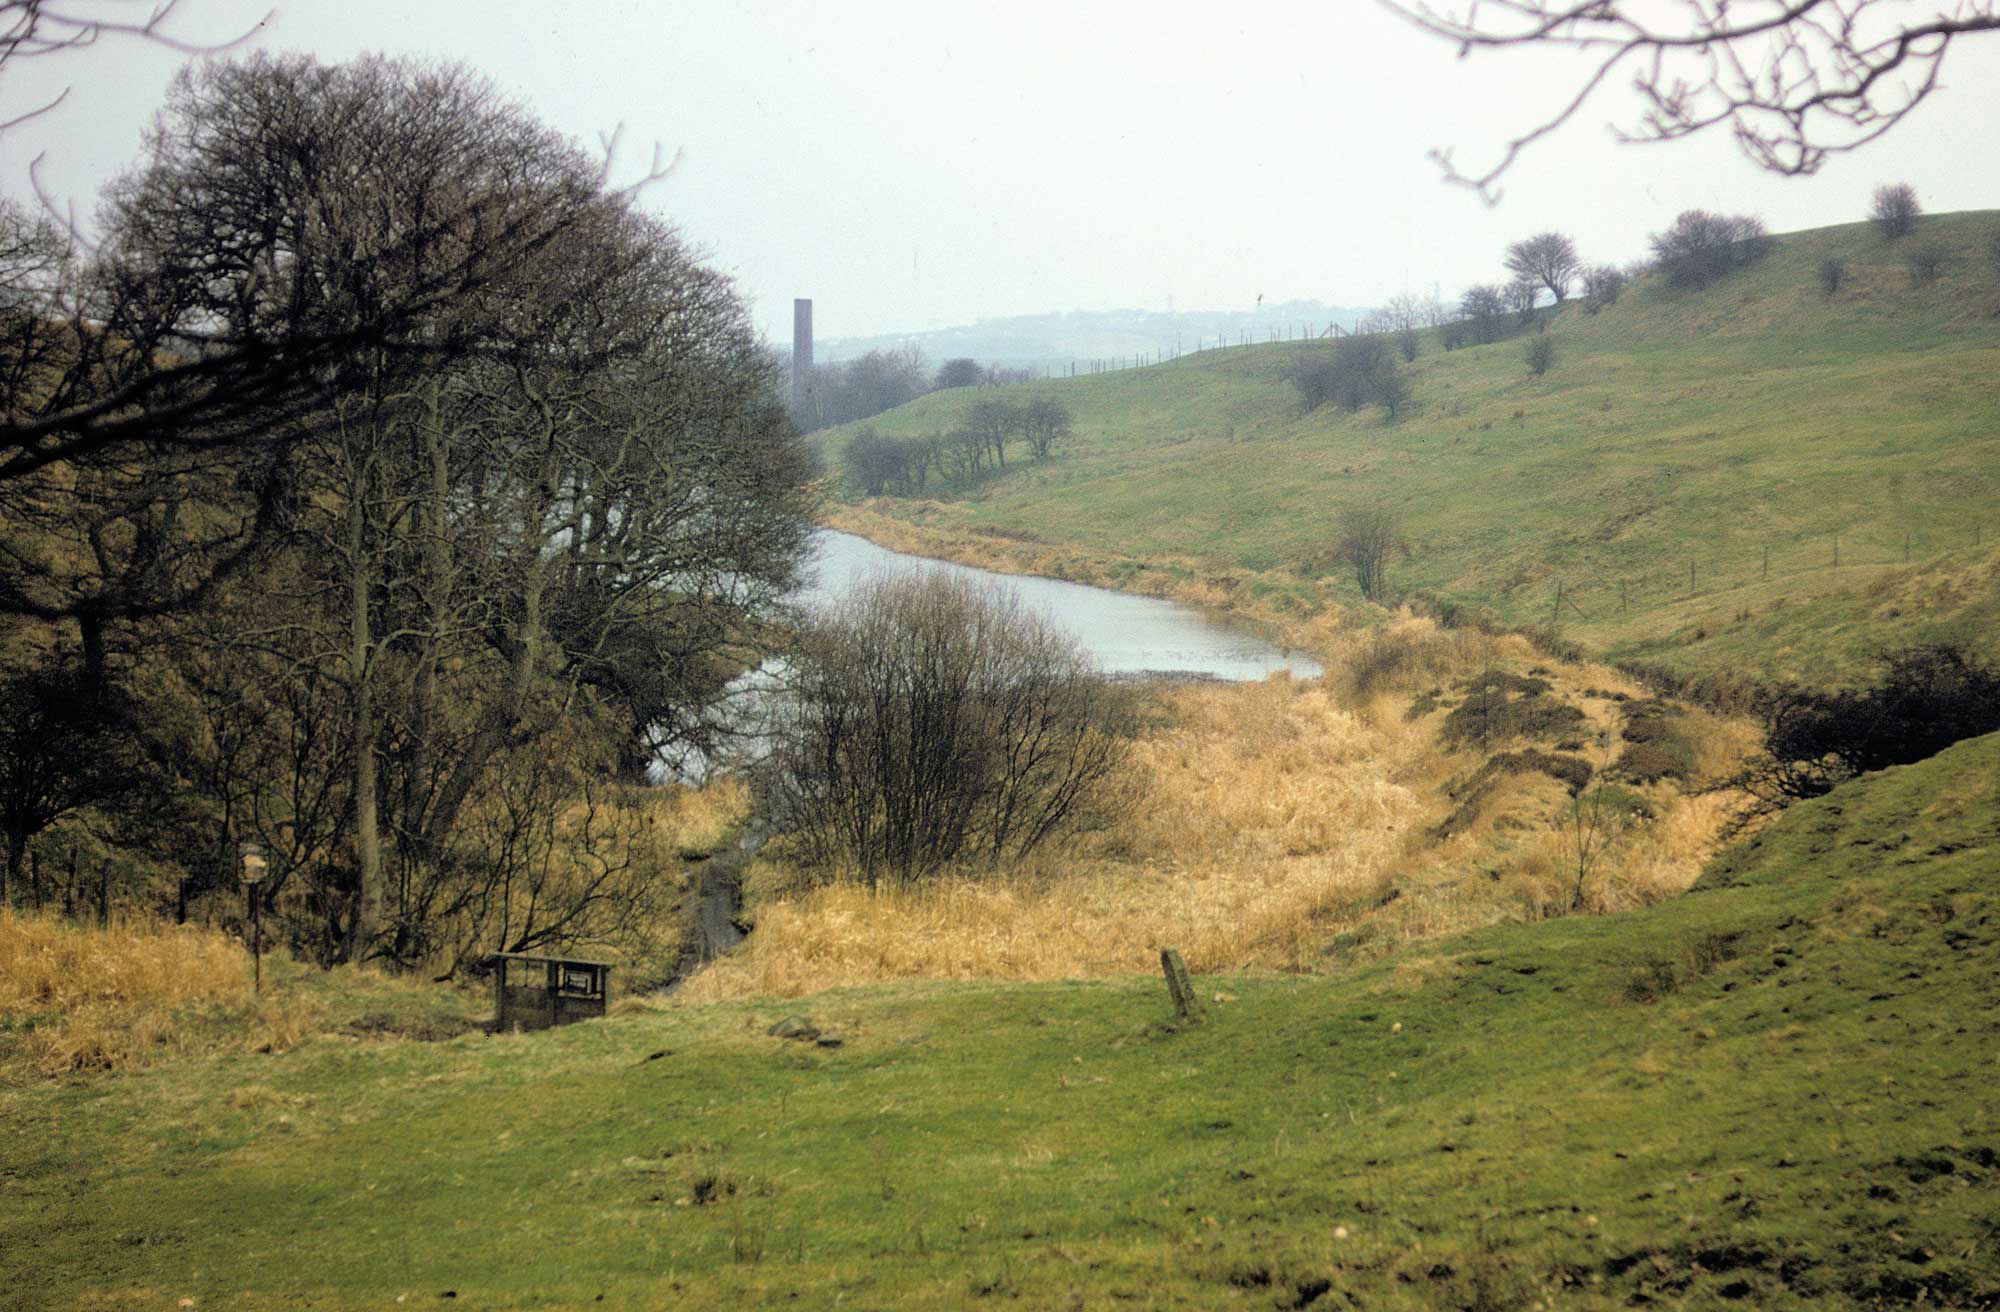 Reservoir situated between rolling hills. Industrial works are visible in the background